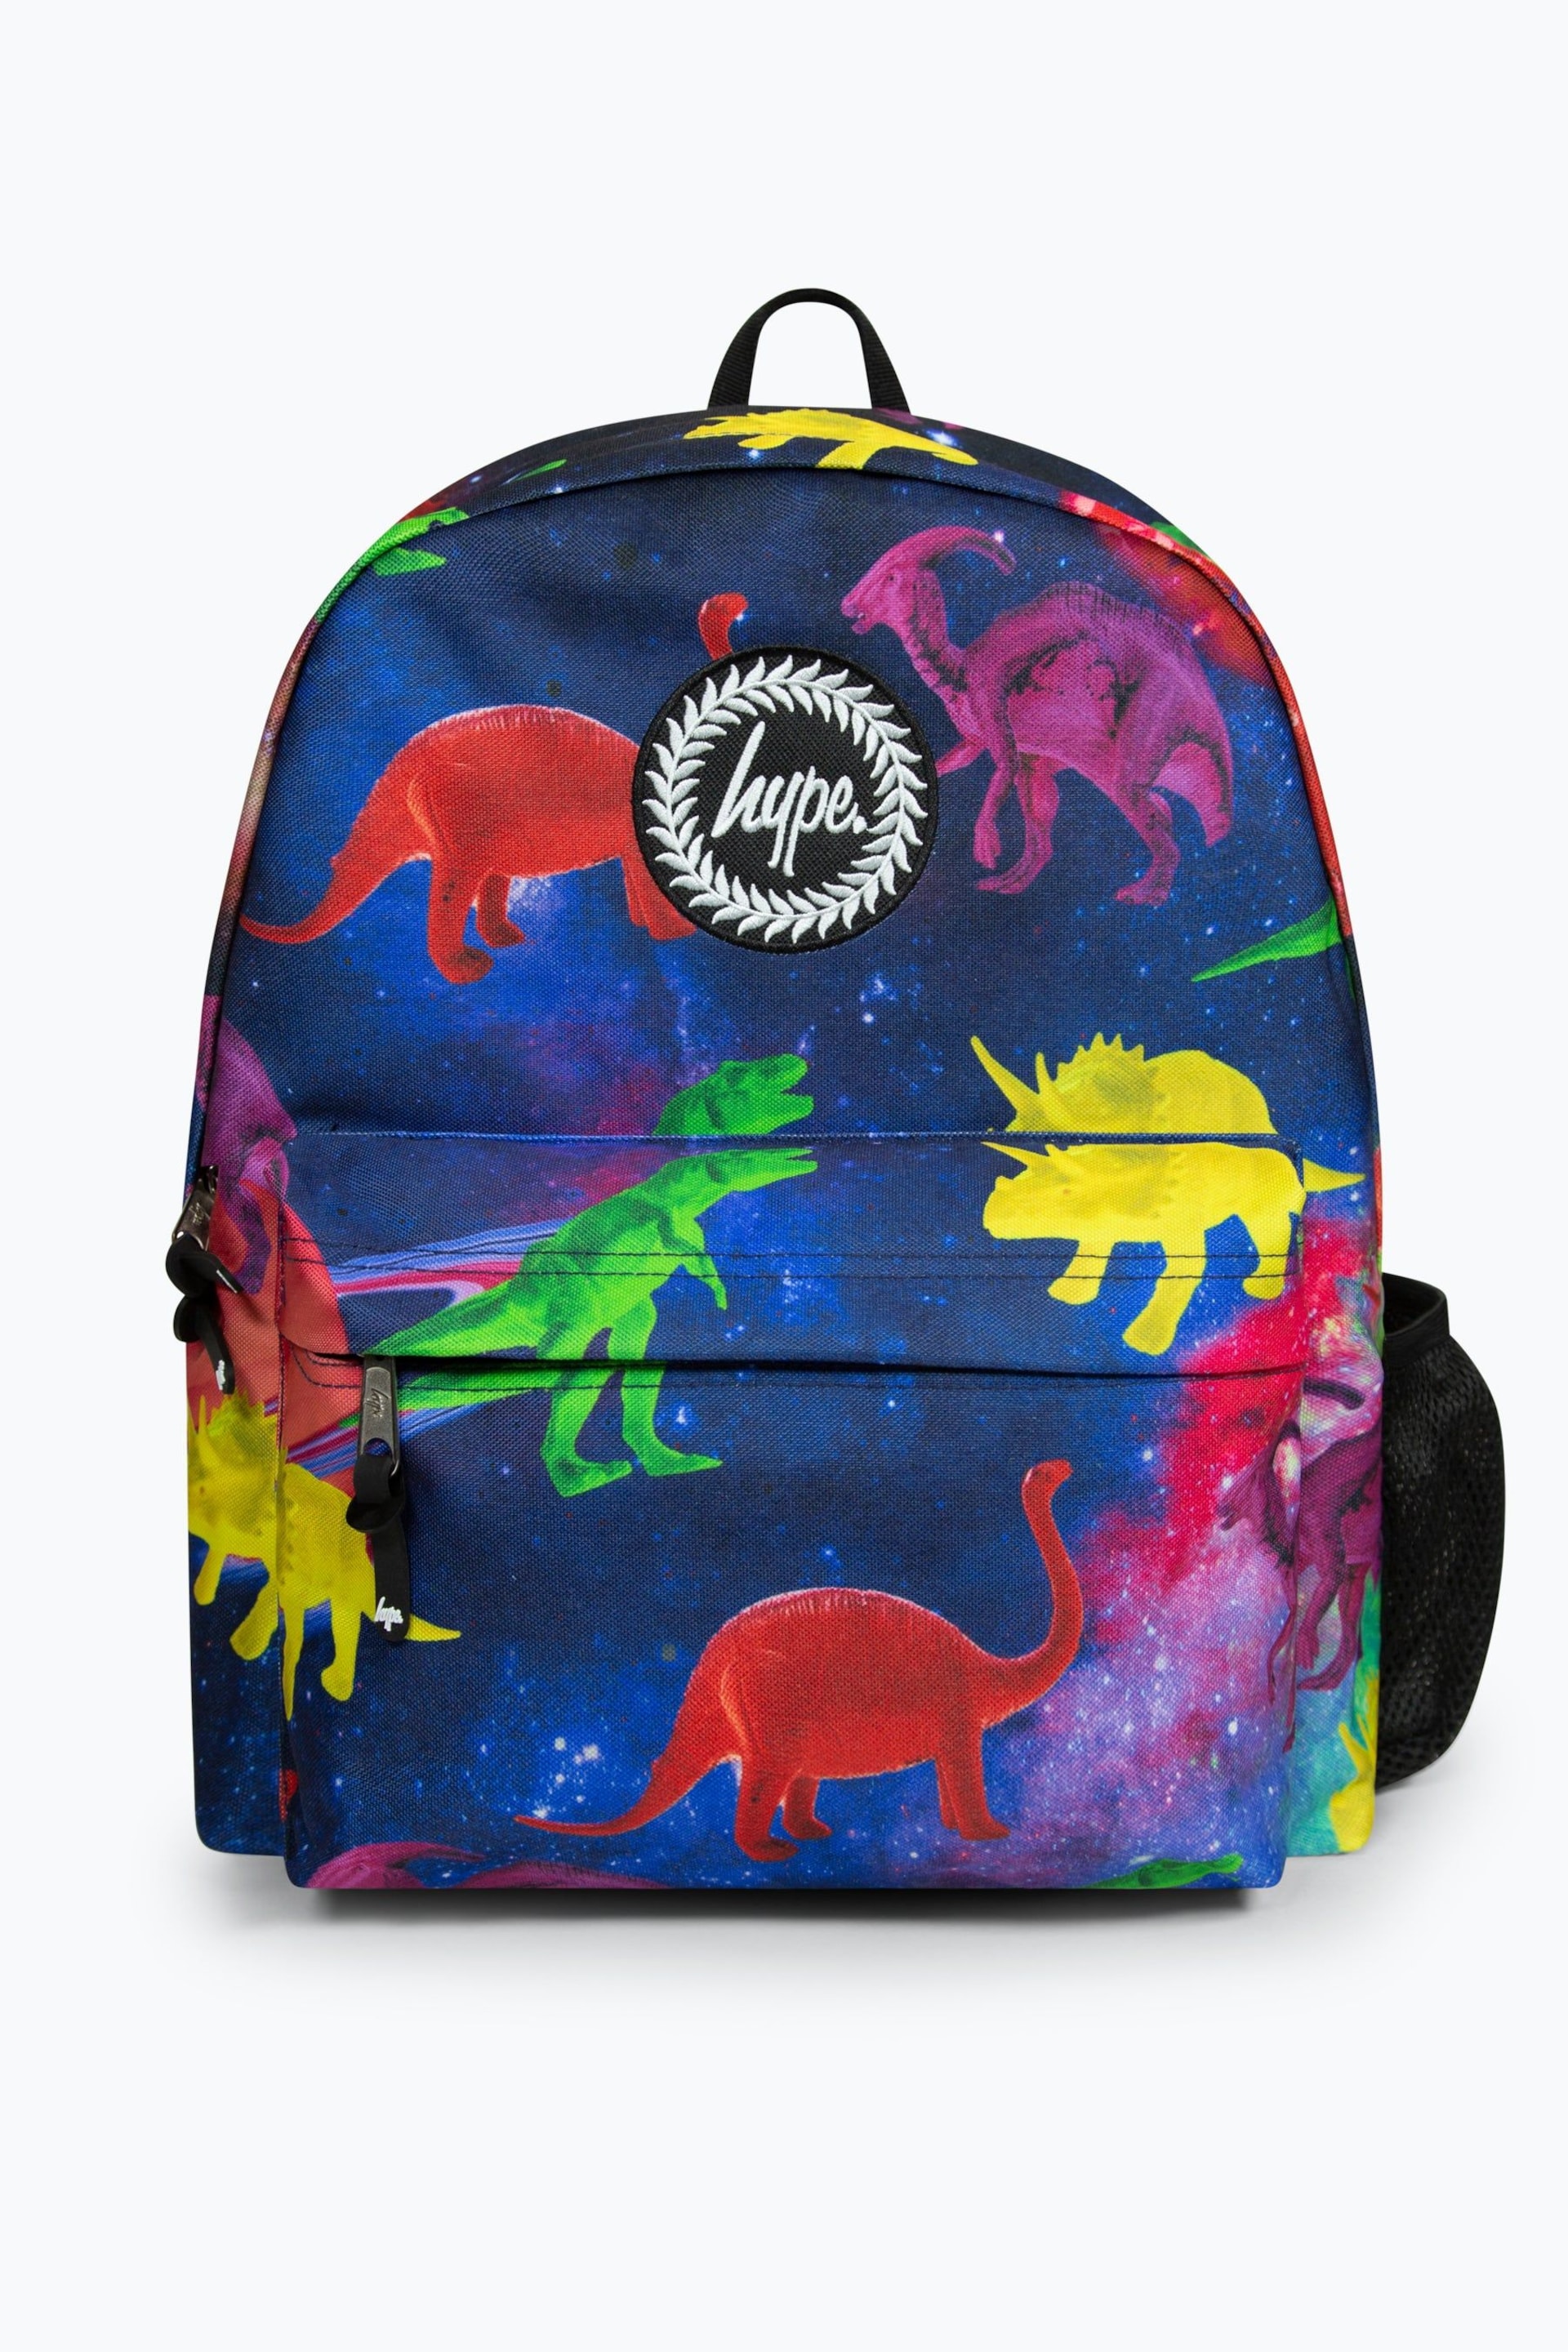 Hype. Multi Space Dinosaurs Badge Backpack - Image 1 of 11